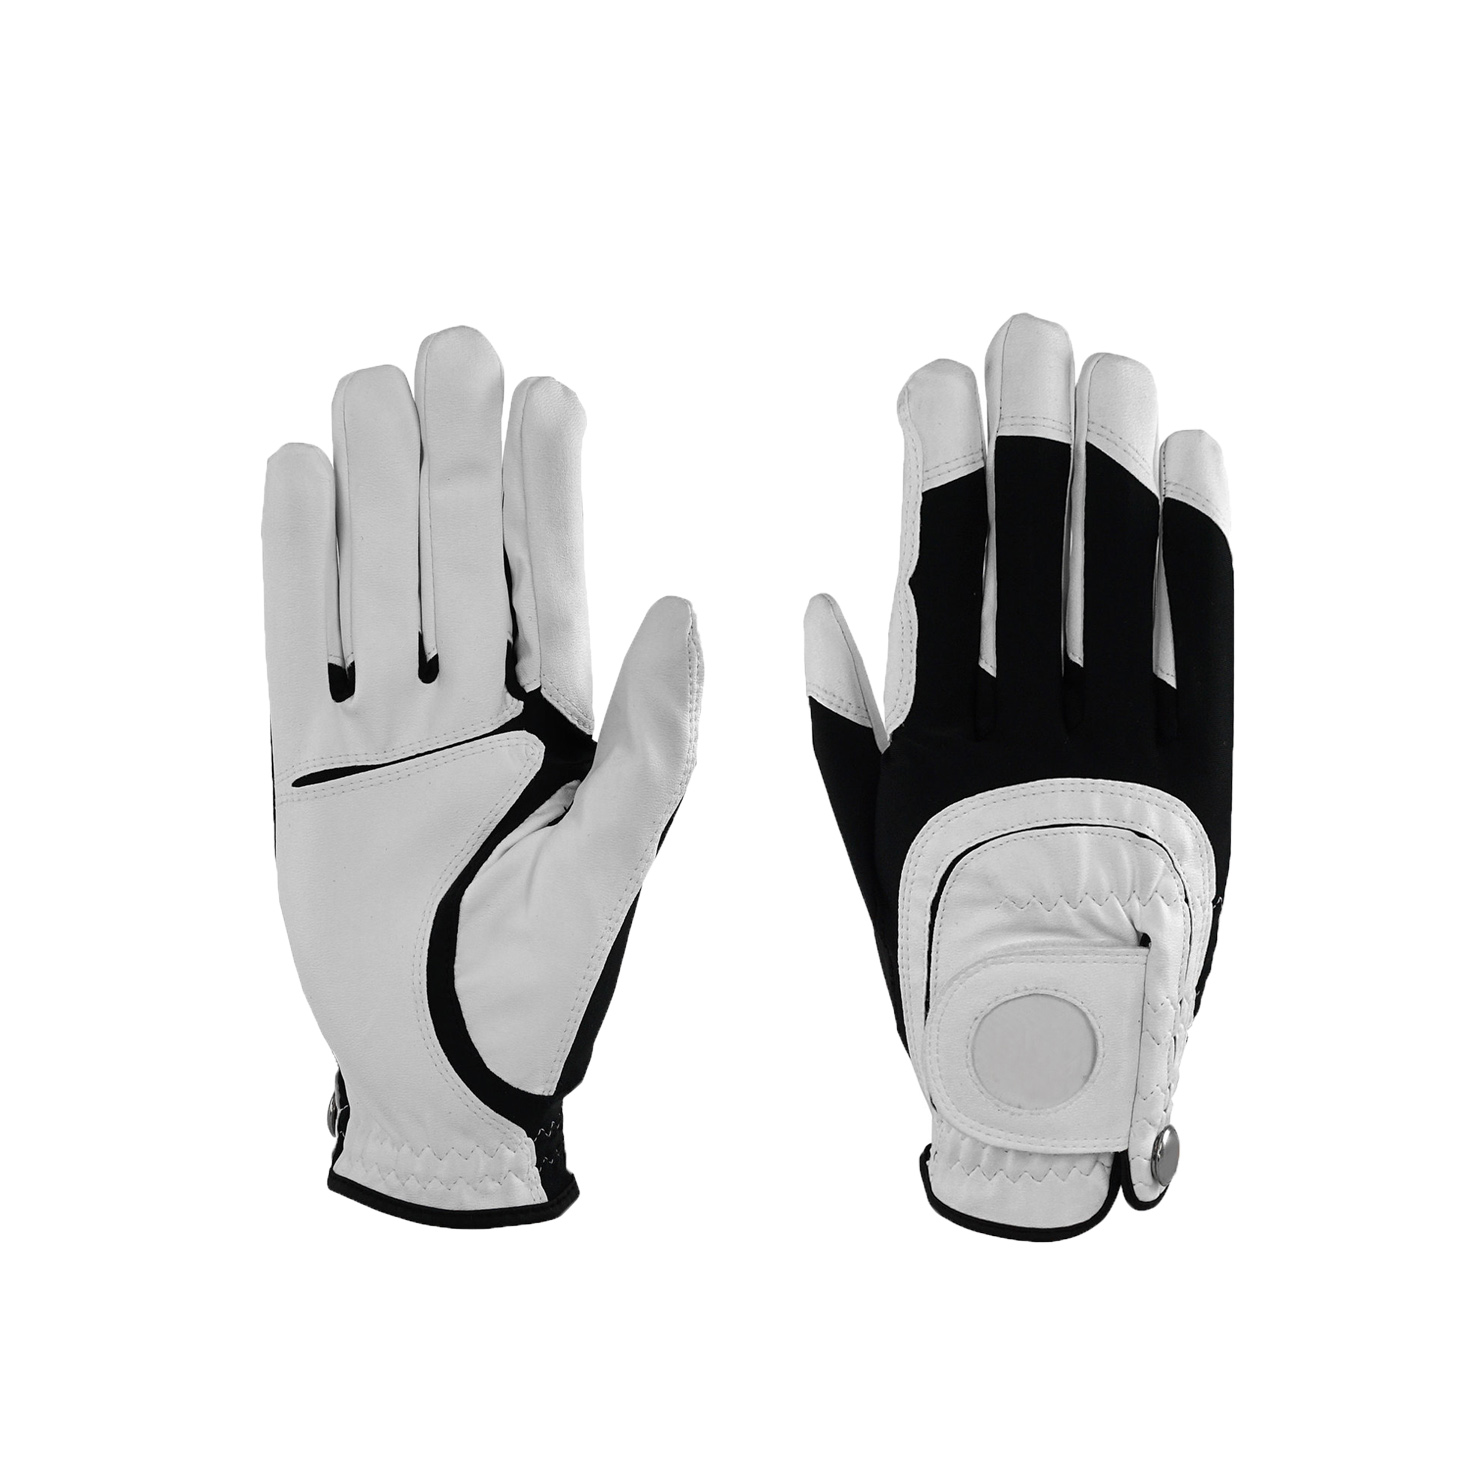 New All weather sports leather golf gloves Mens Excellent grip golfing gloves